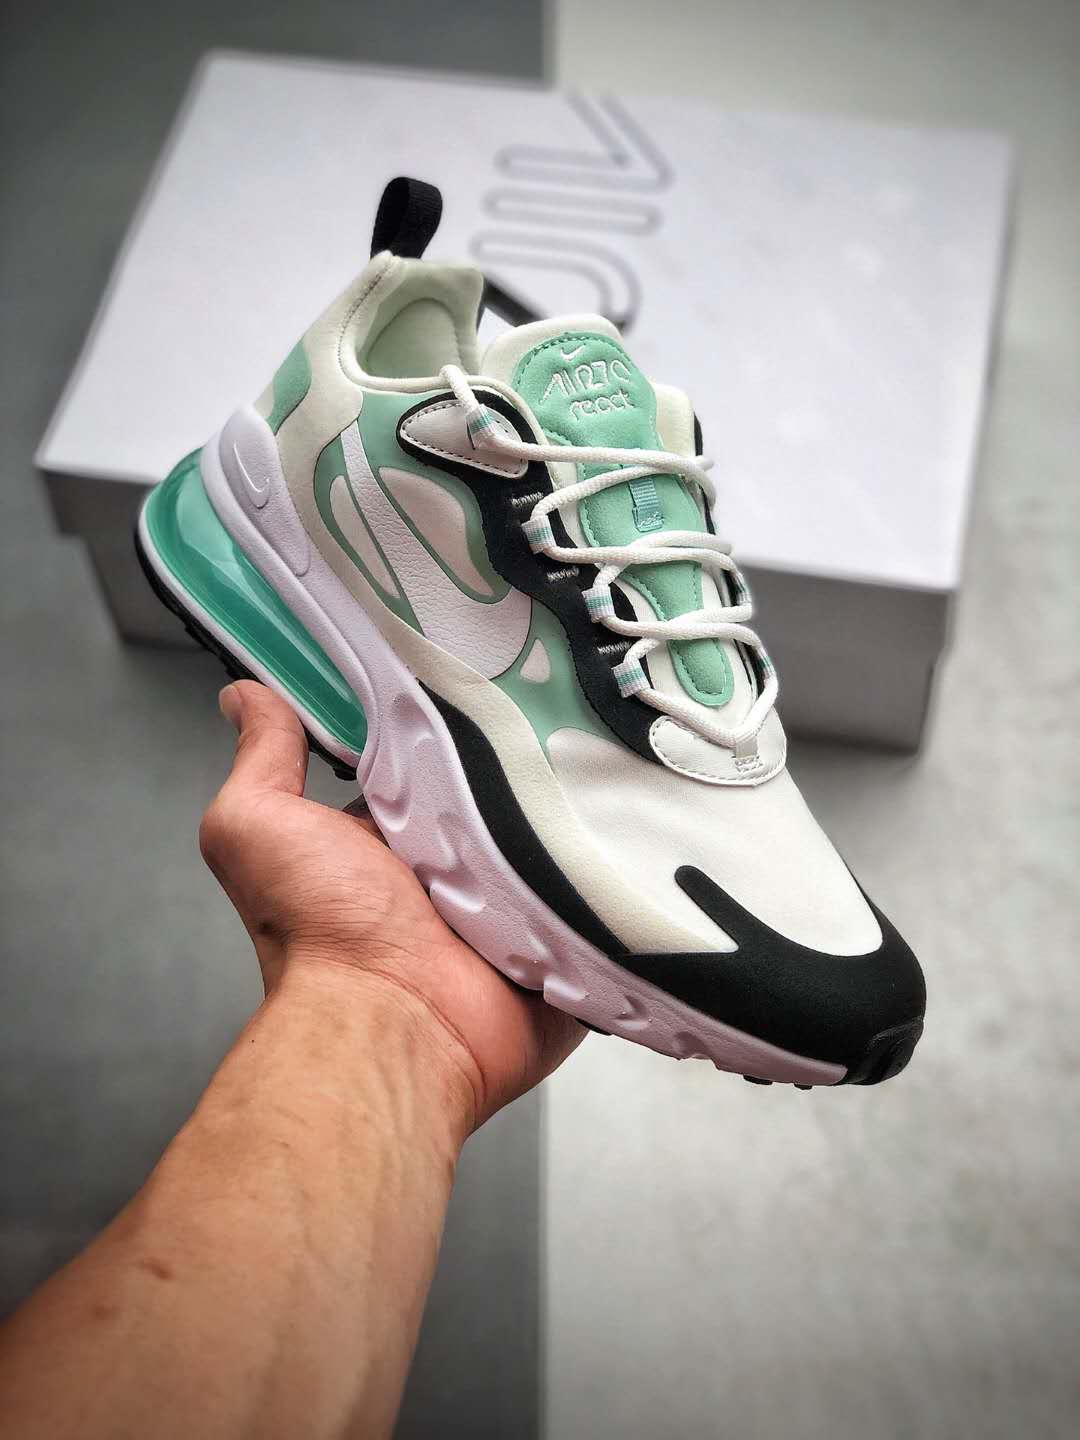 Nike Air Max 270 React White Ice Blue Green Black CJ0619-012 - Stylish and Versatile Footwear for Any Occasion